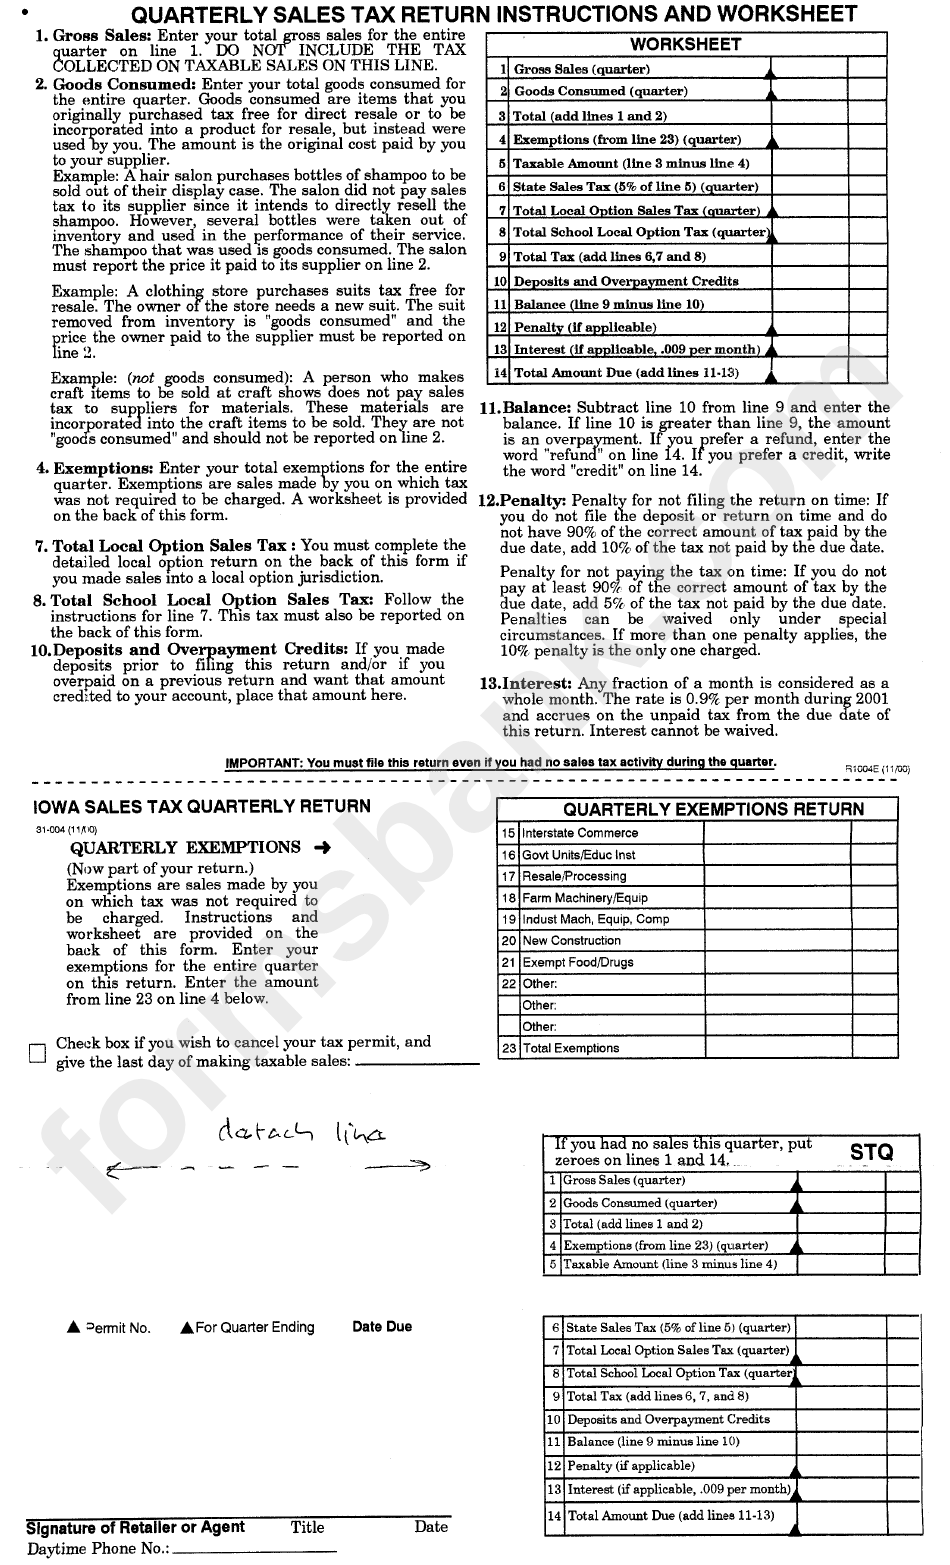 Quarterly Sales Tax Return Form - Instructions And Worksheet